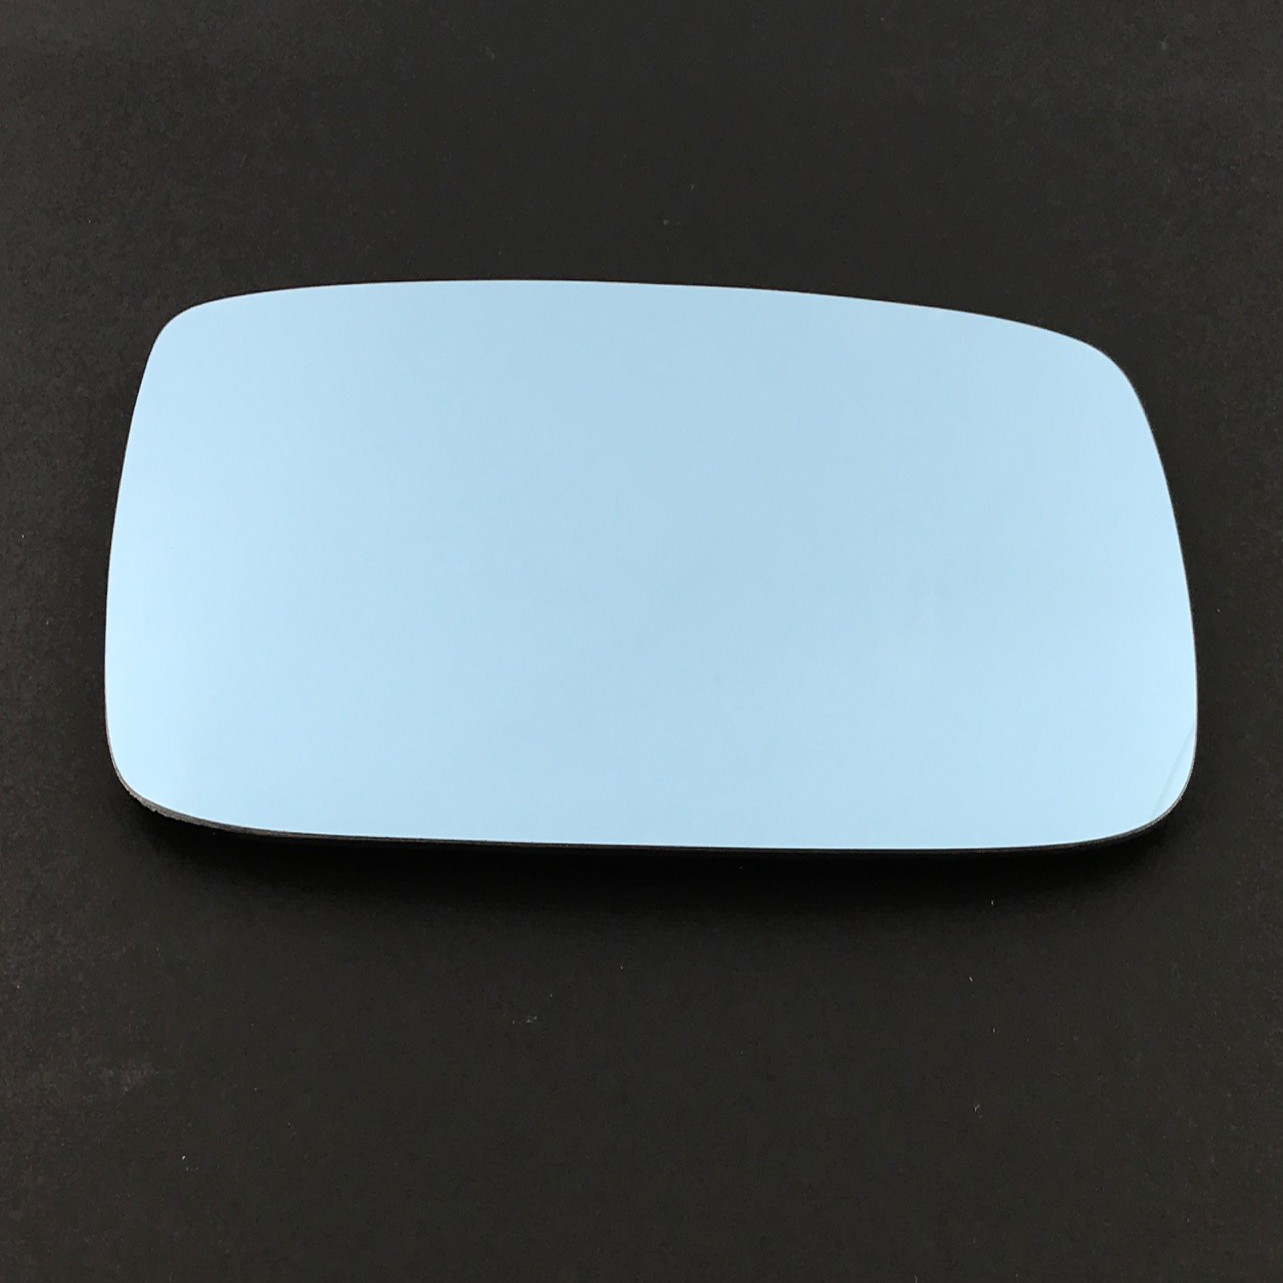 Volvo 740 Wing Mirror Glass LEFT HAND ( UK Passenger Side ) 1984 to 1992 – Convex Wing Mirror ( Blue Tinted )